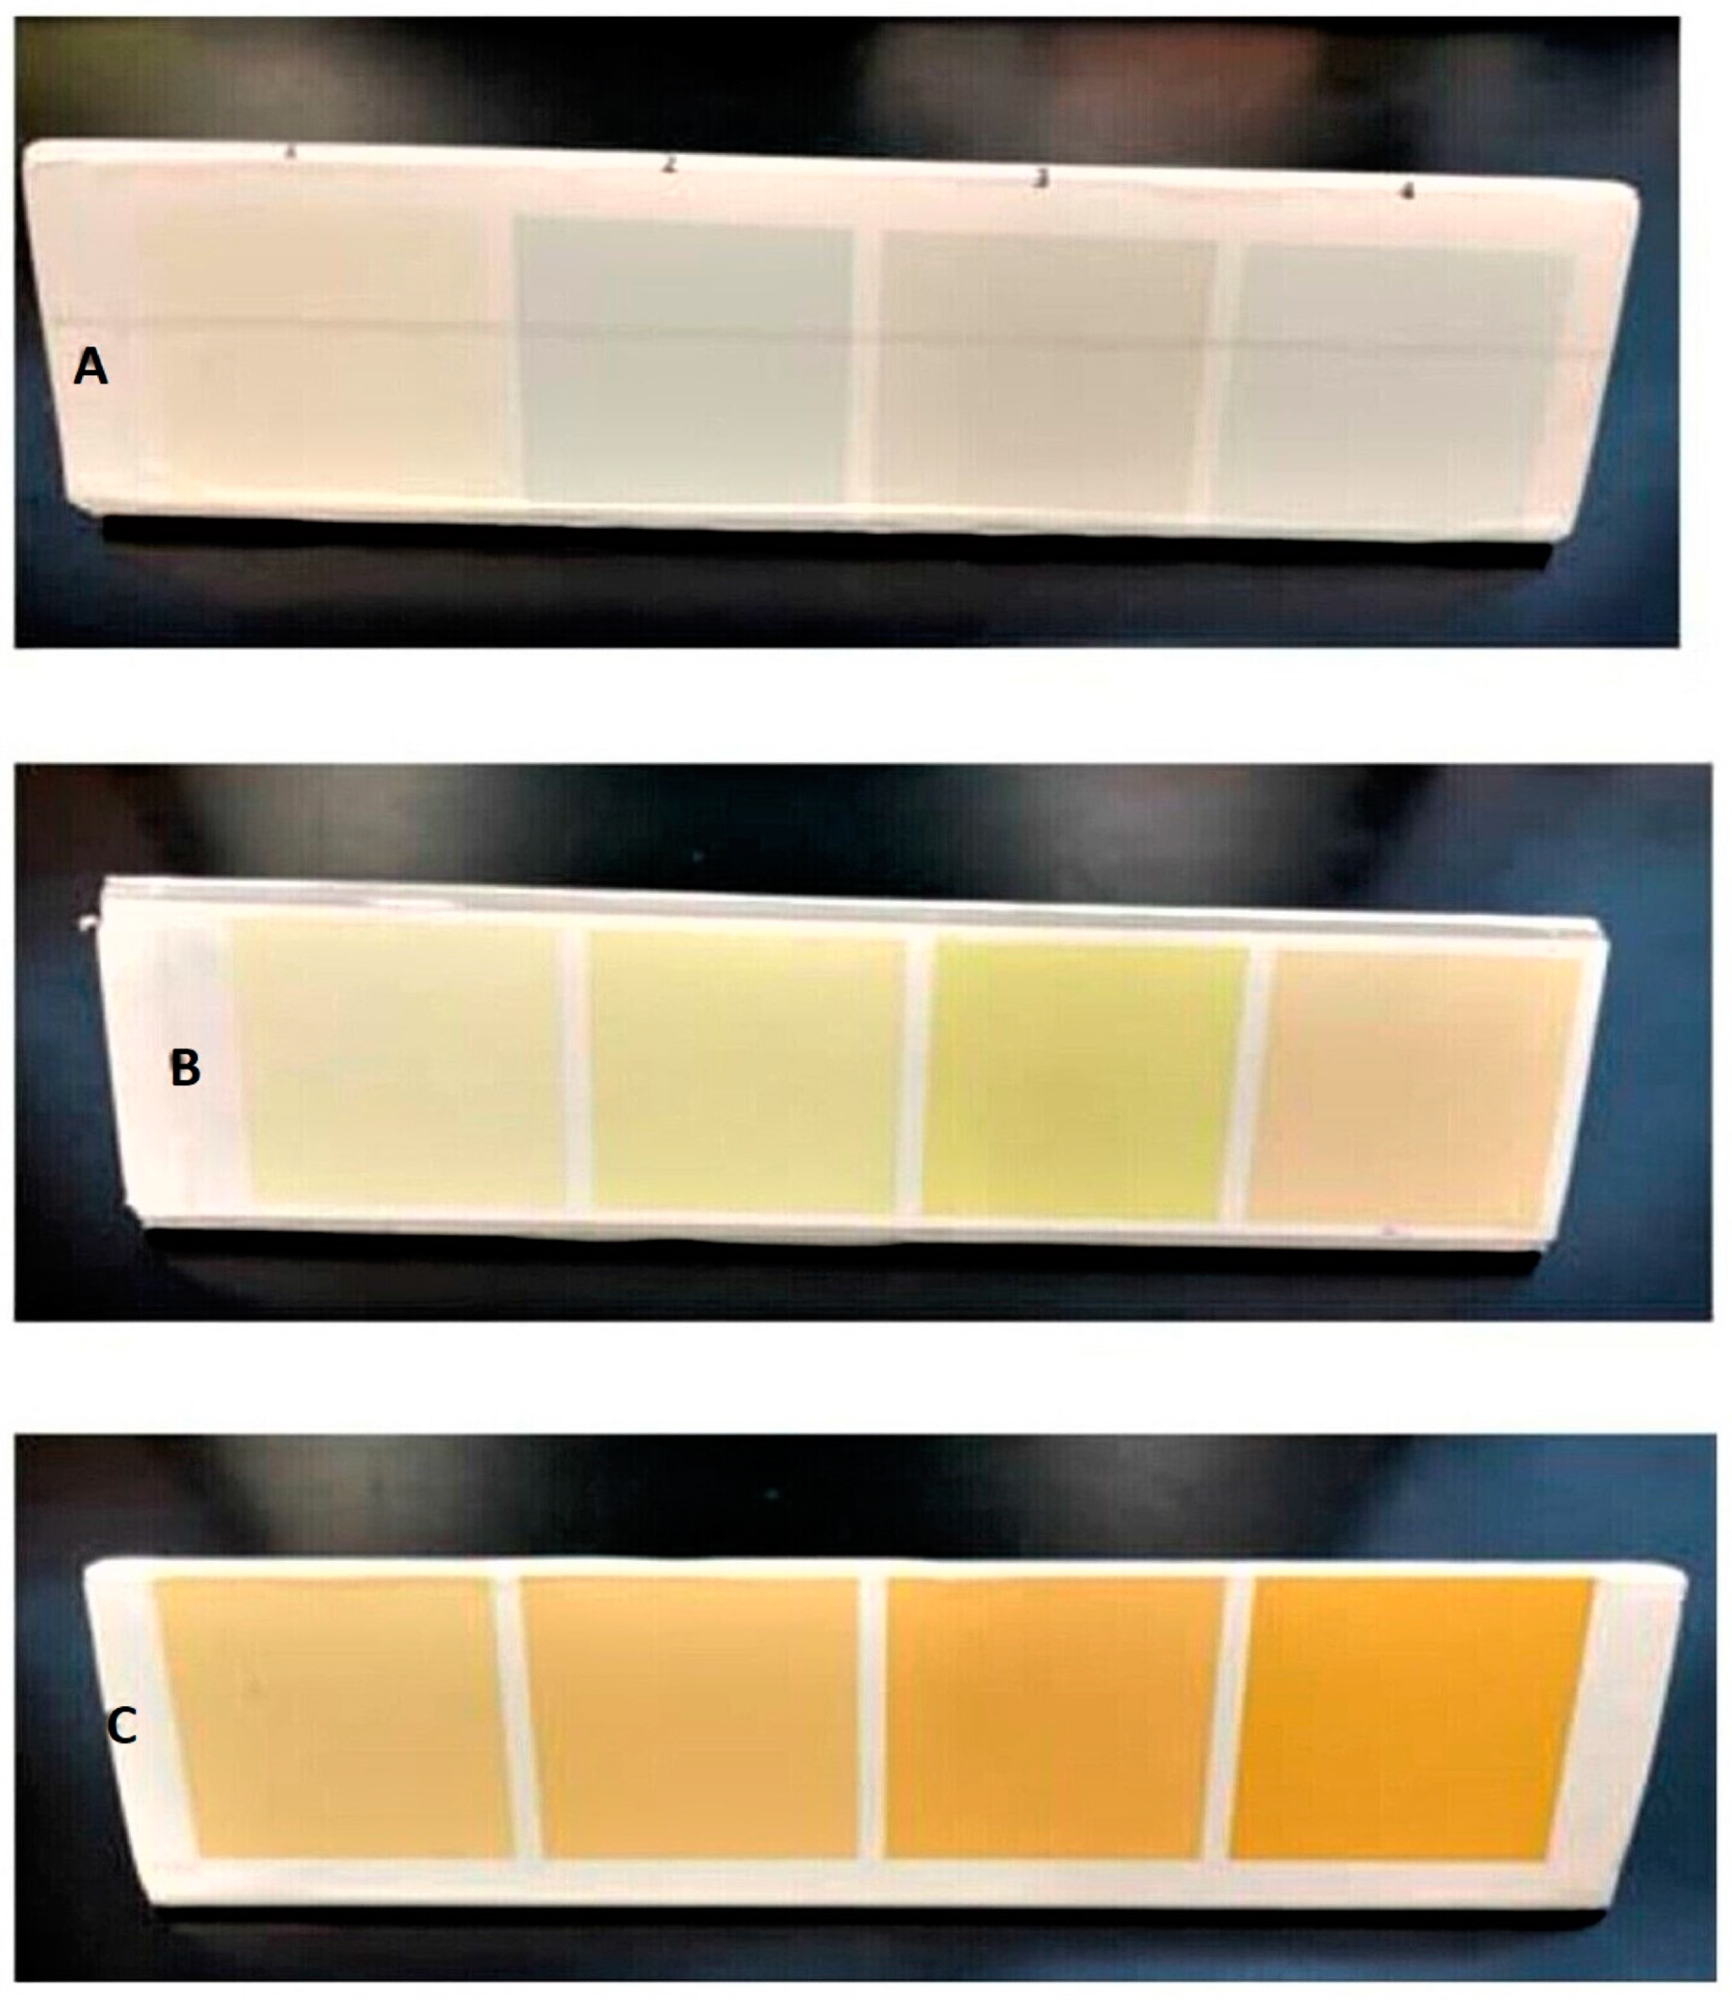 Preliminary HMCG tool comprising 12 shades (December 2018 version). The lighter ‘watery’ shades are grouped in the first row (row A), the ‘regular white’ appearing shades in the second row (row B), and the ‘creamy yellow’ appearing shades are in the third row (row C).